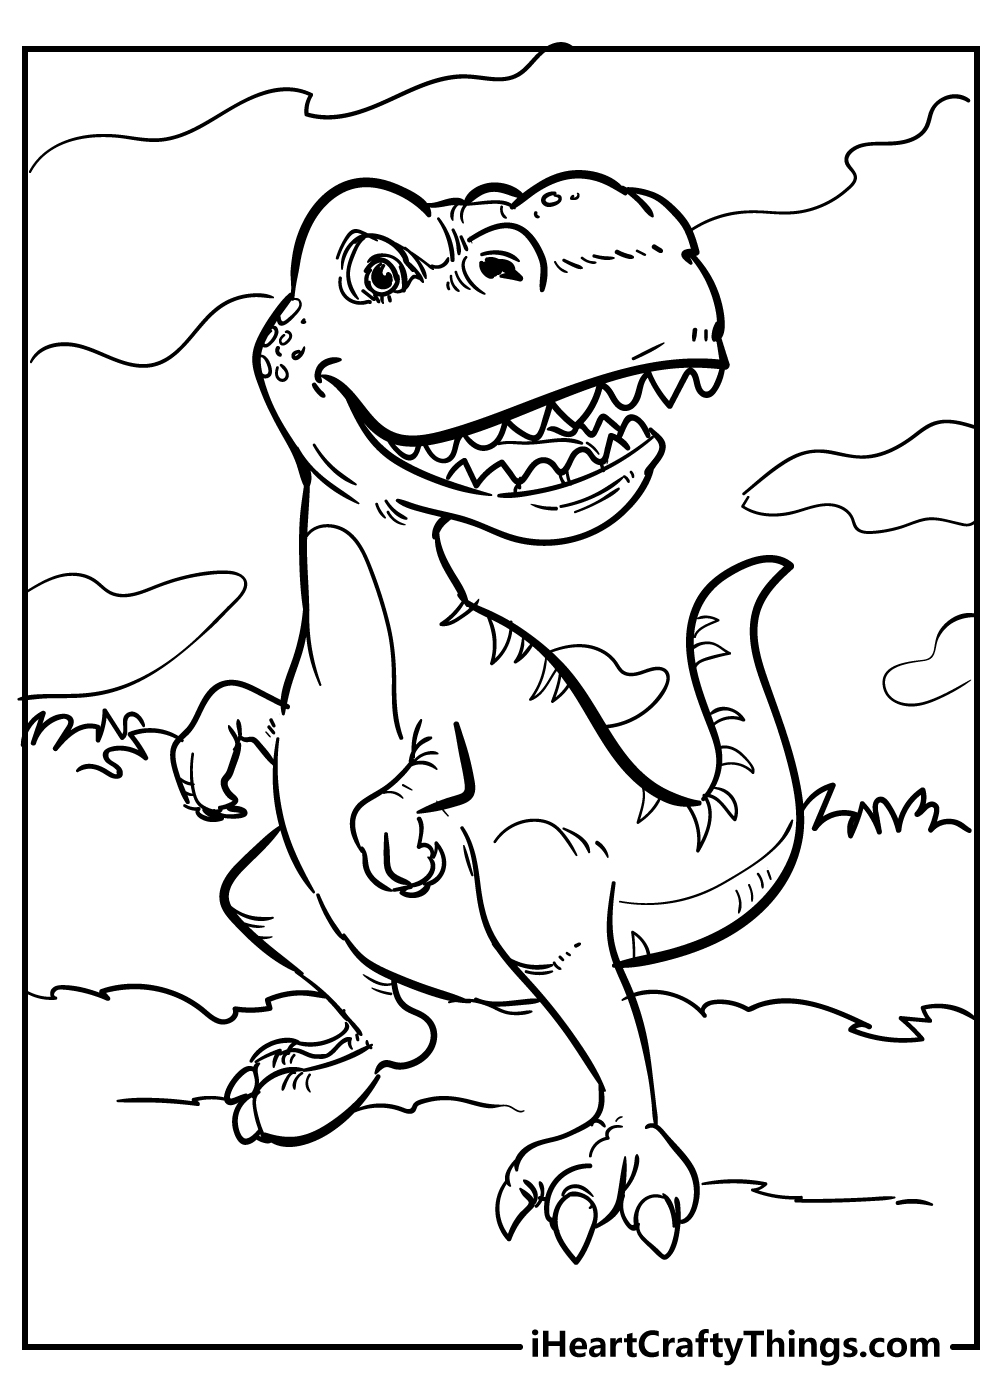 Jurassic Park T-Rex coloring page free for kids